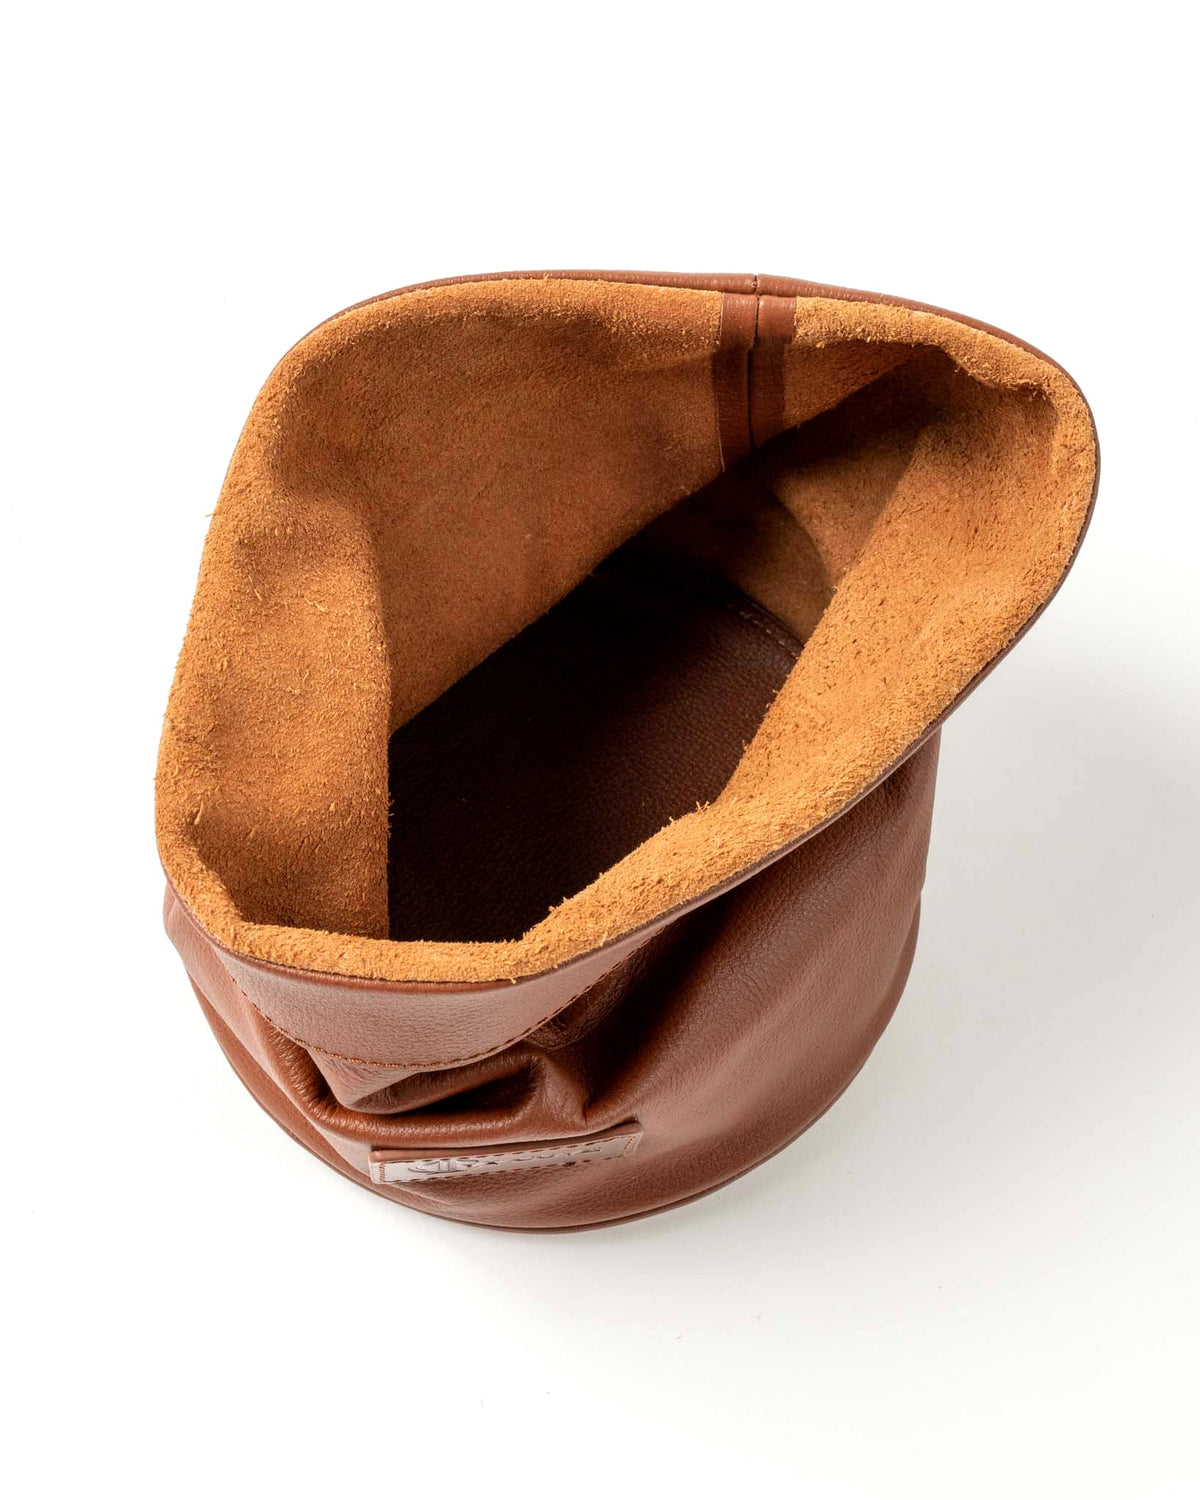 Driftwood Leather Planter - Ivy Cove Montecito